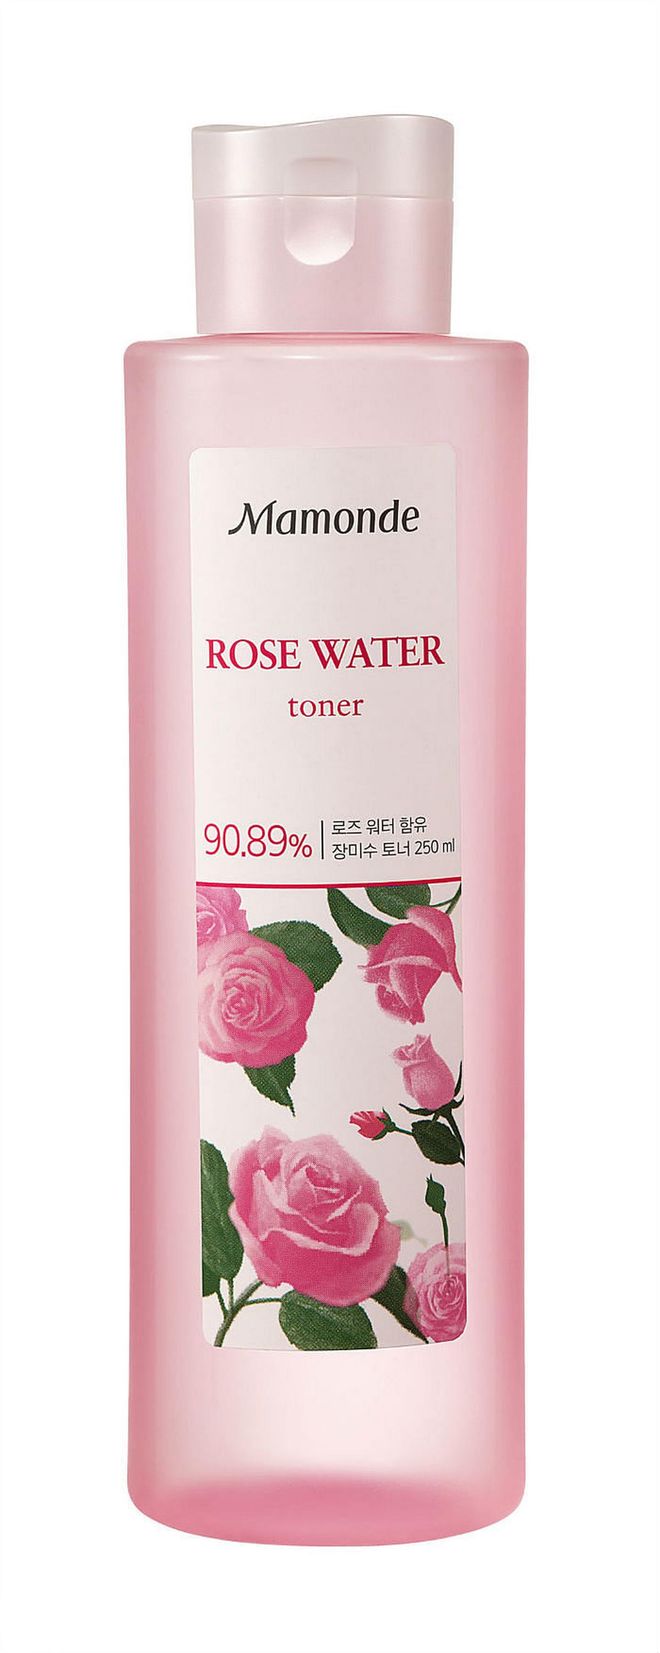 A crowd favourite, the Rose Water Toner contains precious rose water and other skin-loving ingredients to refresh, tone, and brighten the skin when it needs a little pick-me-up. Great as either a toner or for spritzing when days are balmy. (Photo: Mamonde)